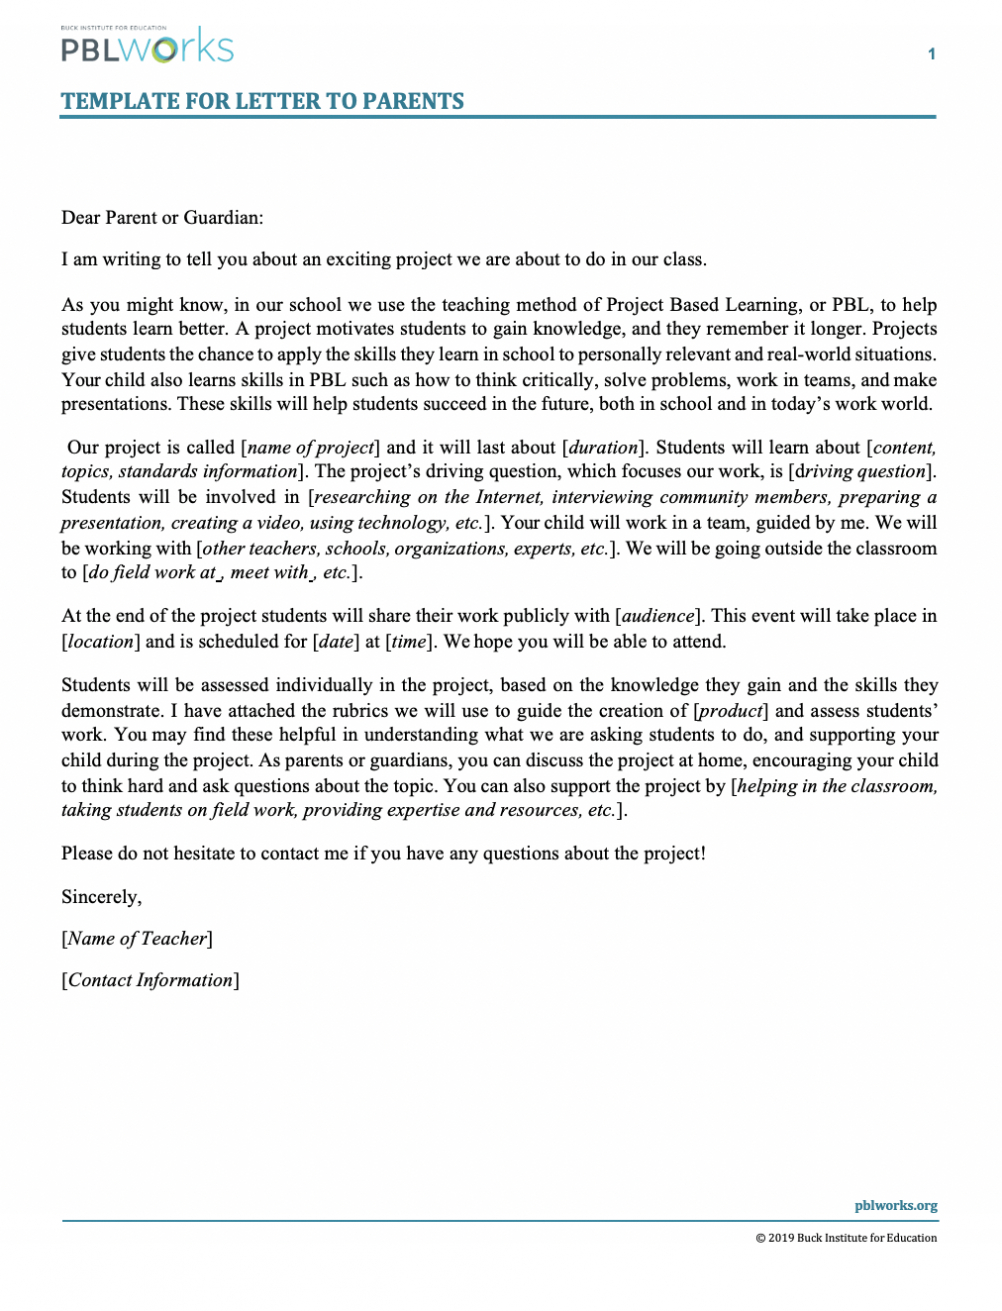 Template For Letter To Parents | Mypblworks with regard to Letter To Parents Template From Teachers